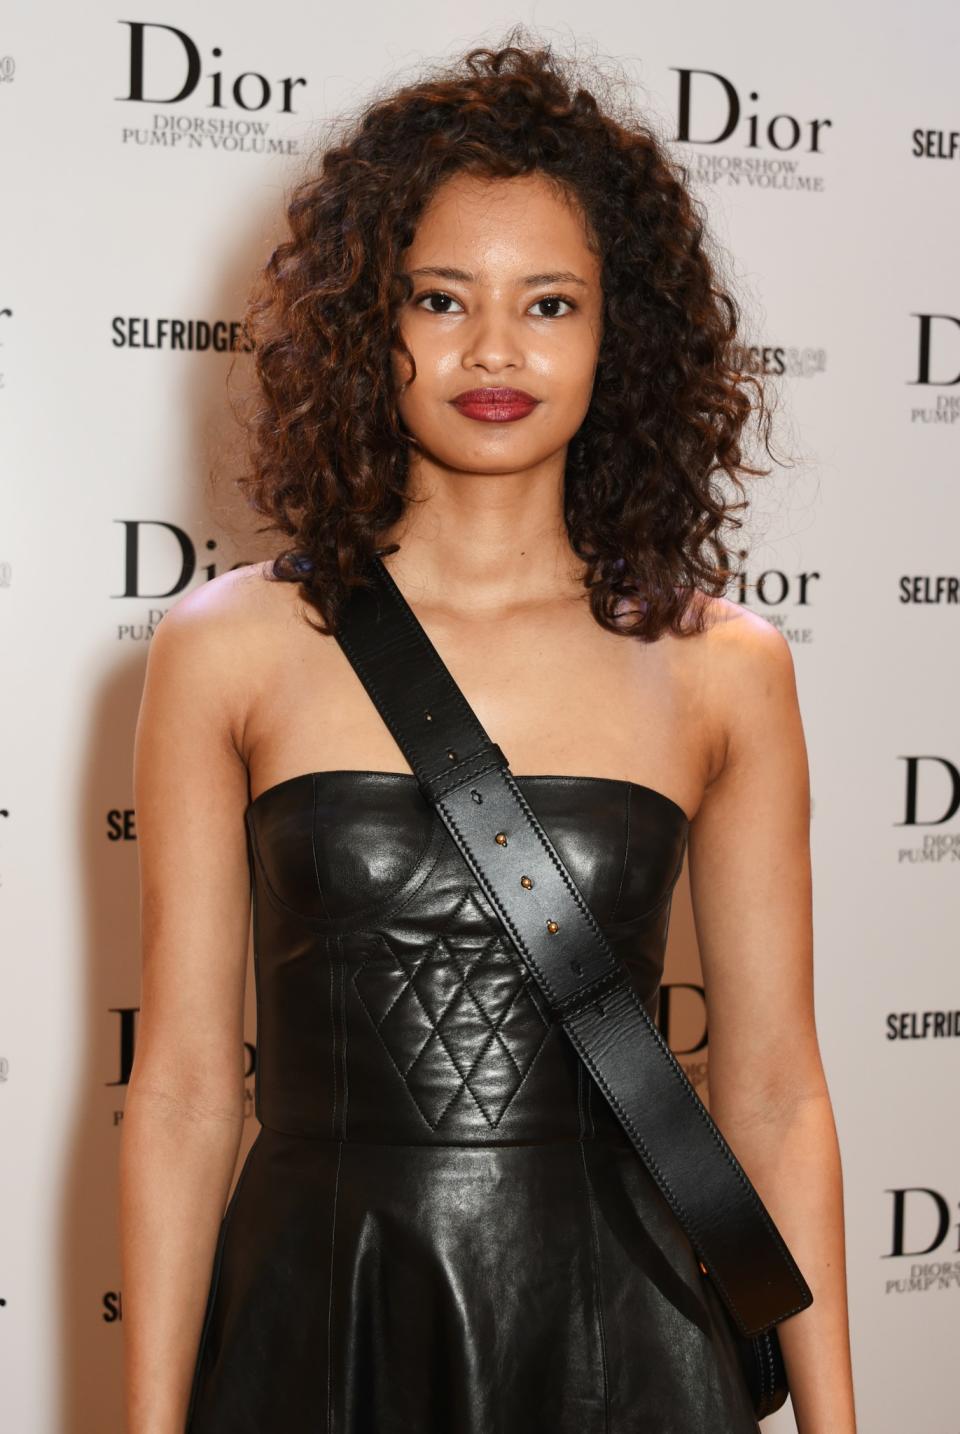 <p>The Kenyan-born British model embraced her natural hair and sported this lush, curly ‘do to the launch of the Dior Pump ‘N’ Volume Mascara in London. Her natural-looking makeup and bold, cherry-red lips add the finishing touches. (Photo: Getty Images) </p>